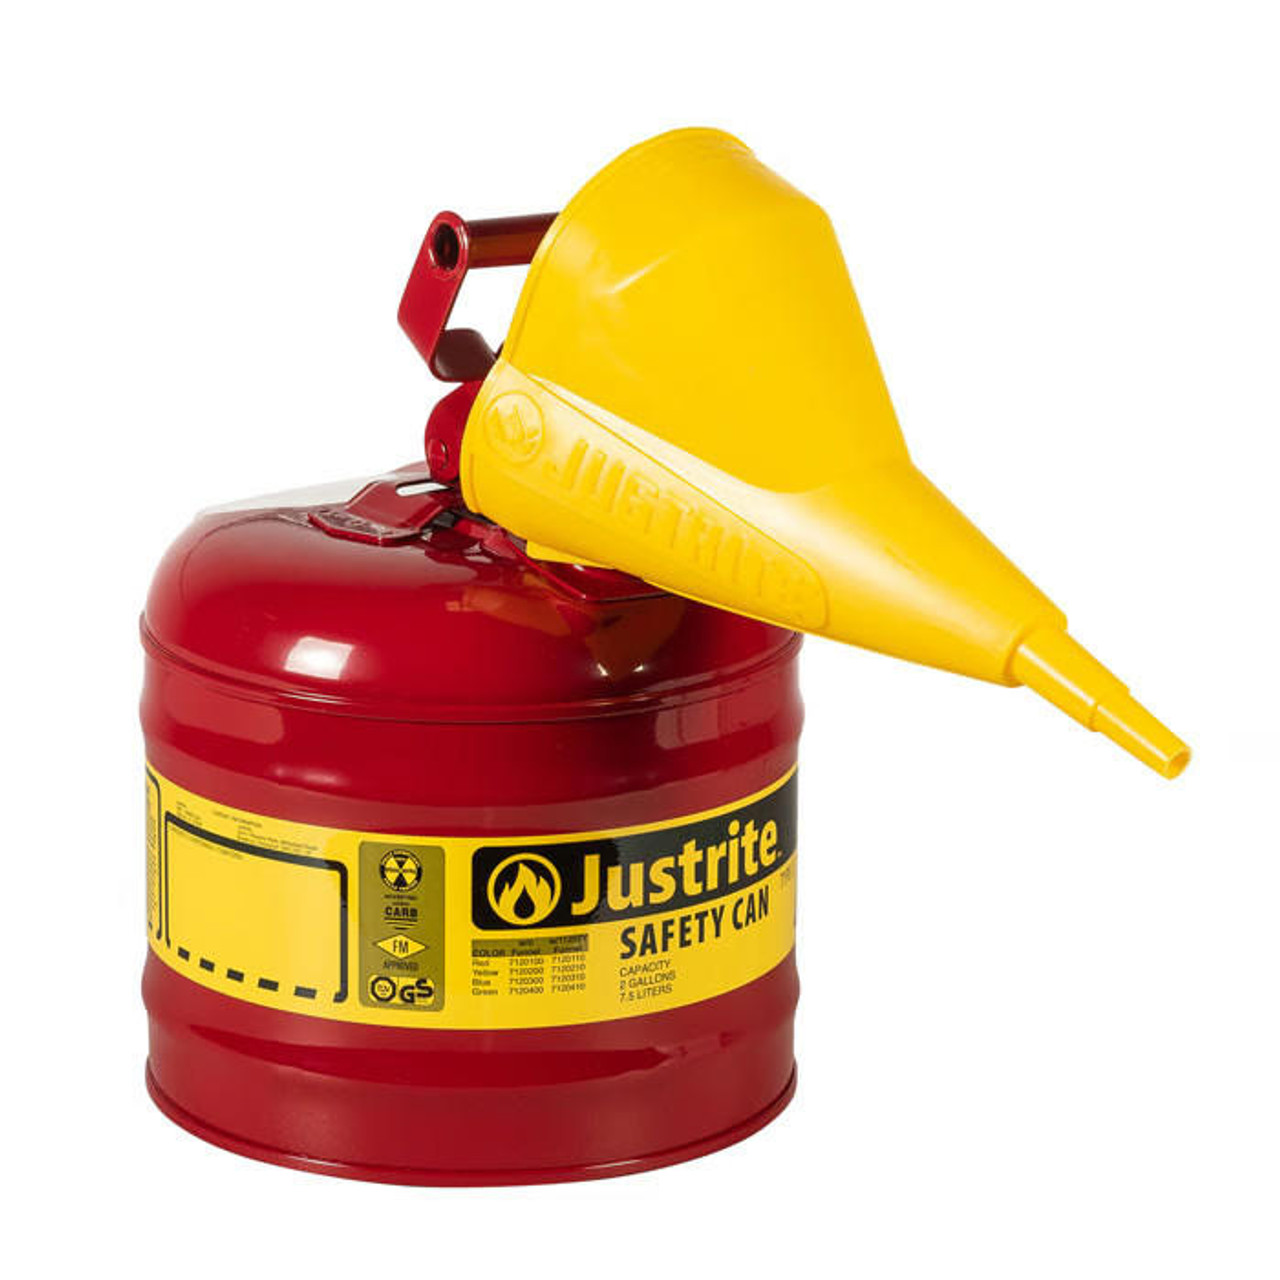 JUSTRITE 2 GAL TYPE I SAFETY CAN FUNNEL